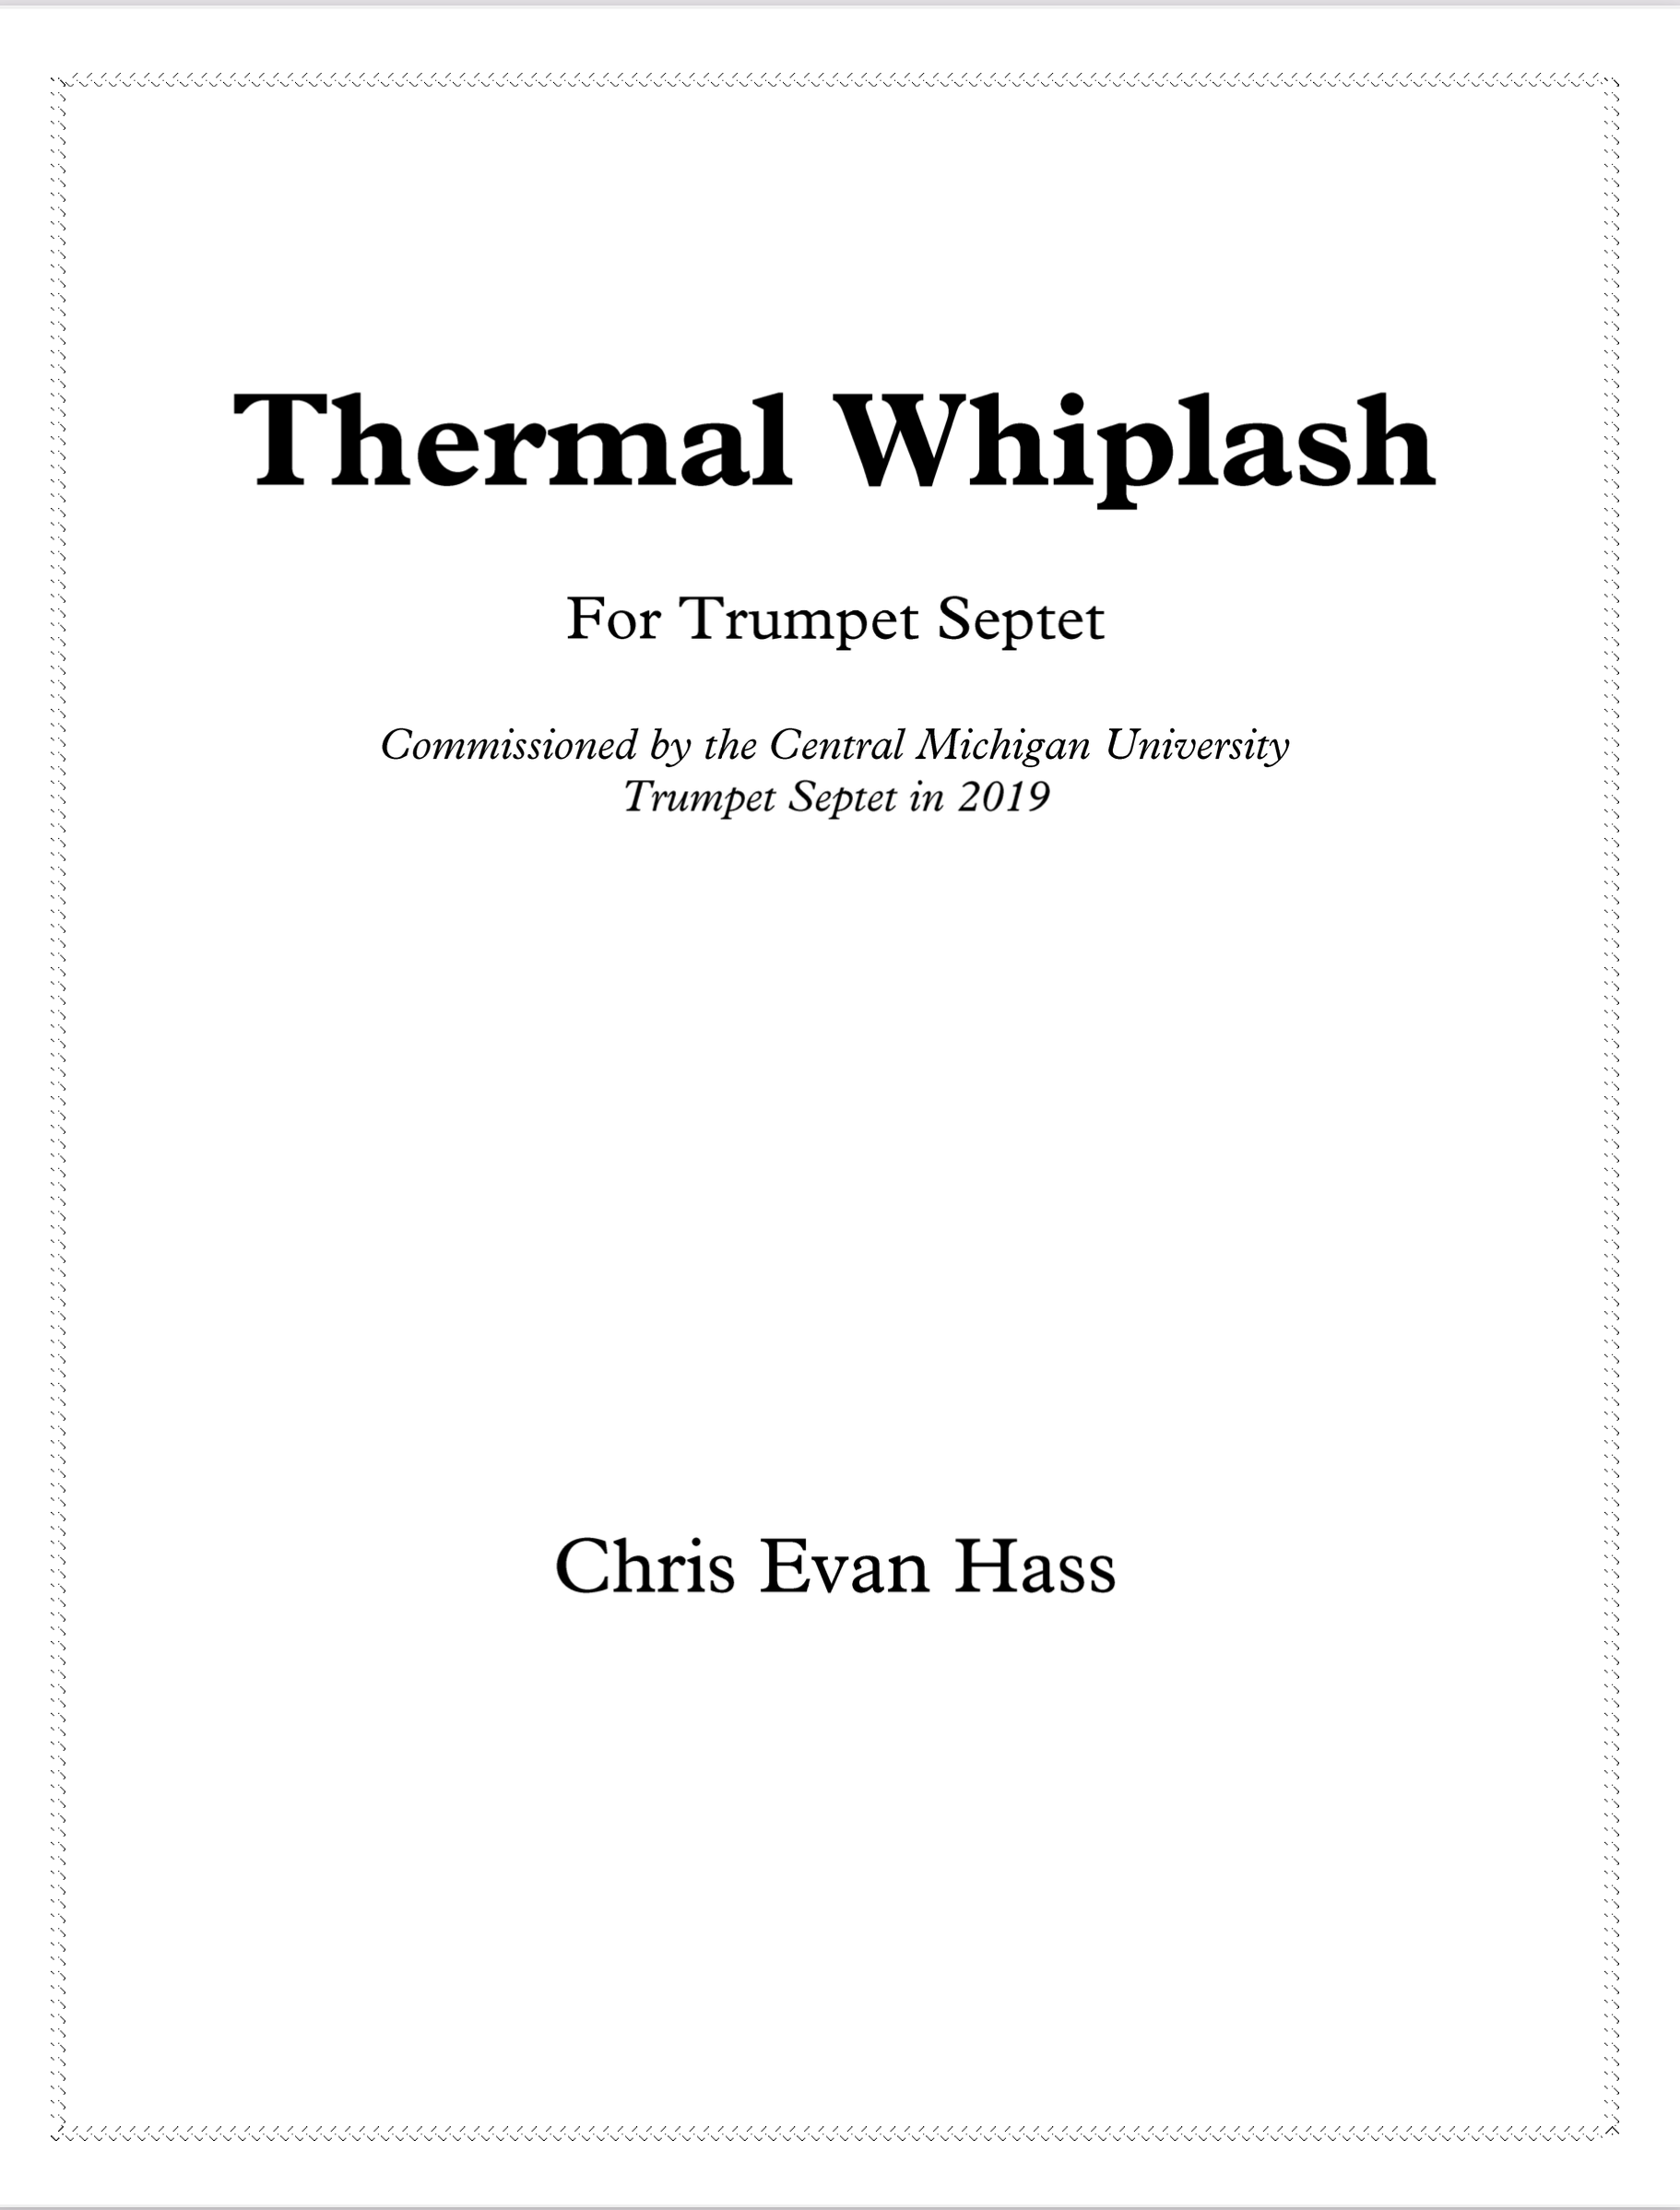 Thermal Whiplash by Chris Evan Hass